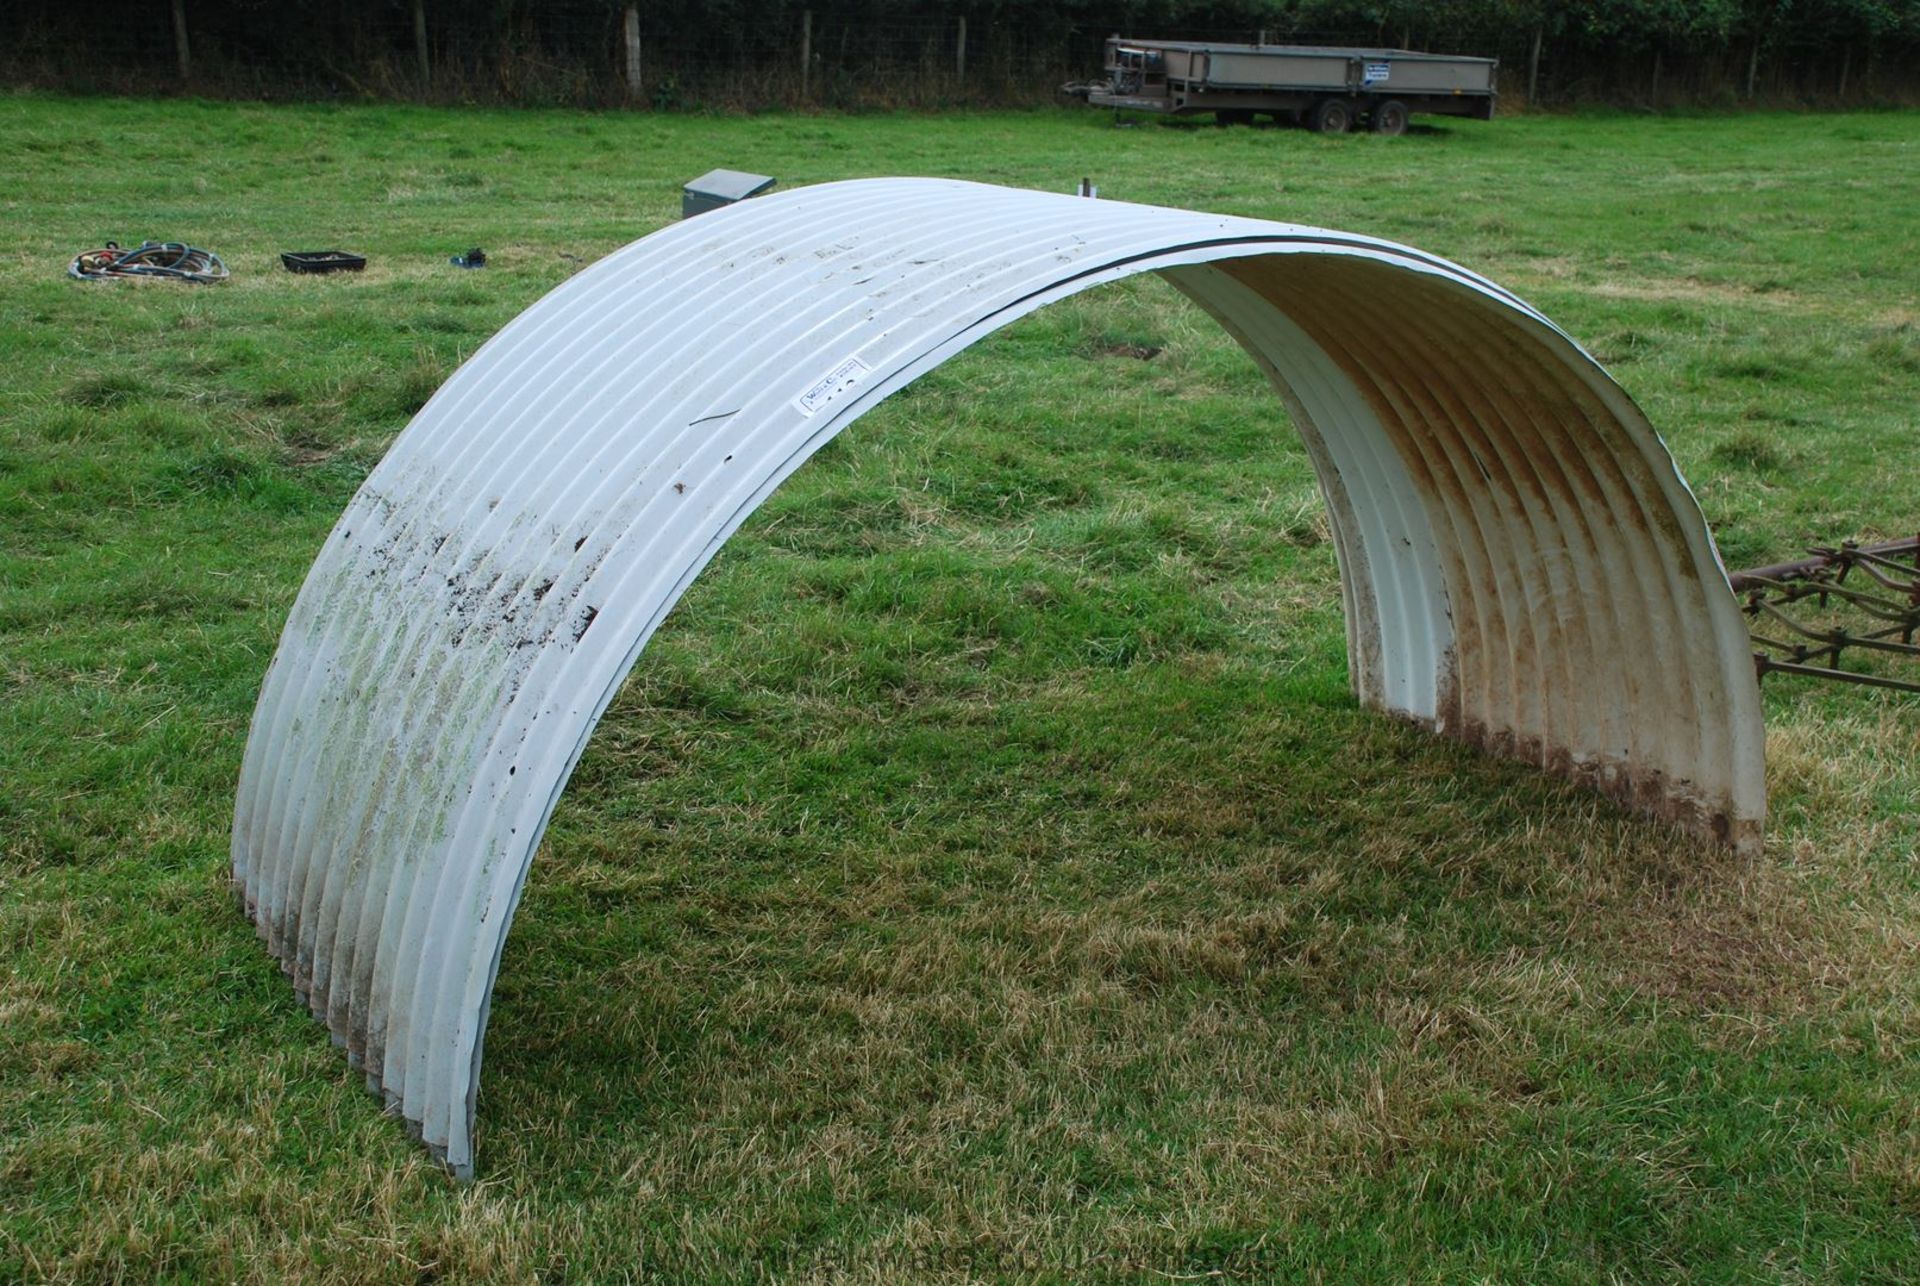 Two 8' span corrugated iron pig-arc roof sheets.